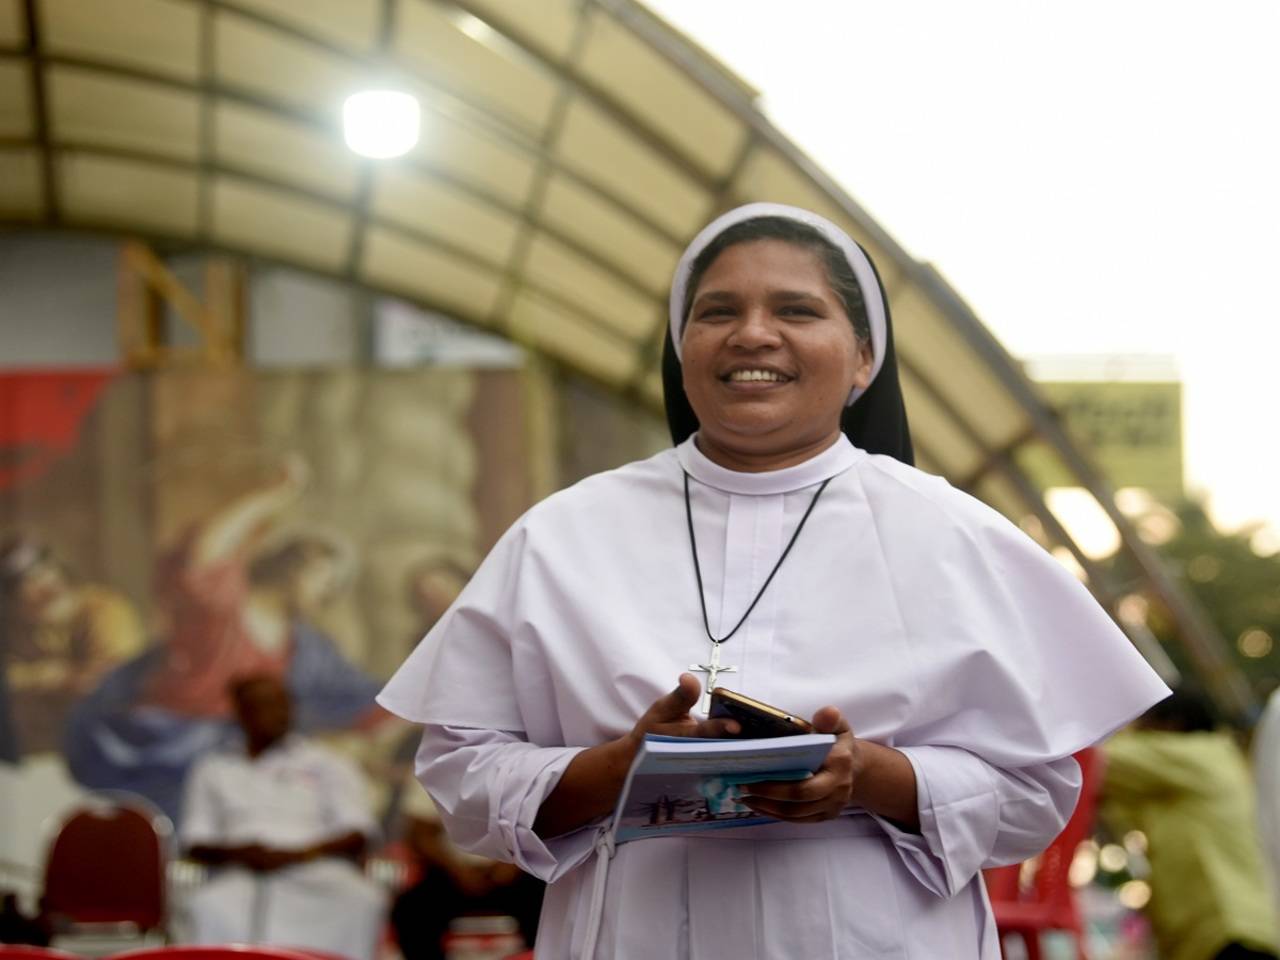 Kerala Sister Lucy lays bare sexual abuse by priests Thiruvananthapuram News photo image